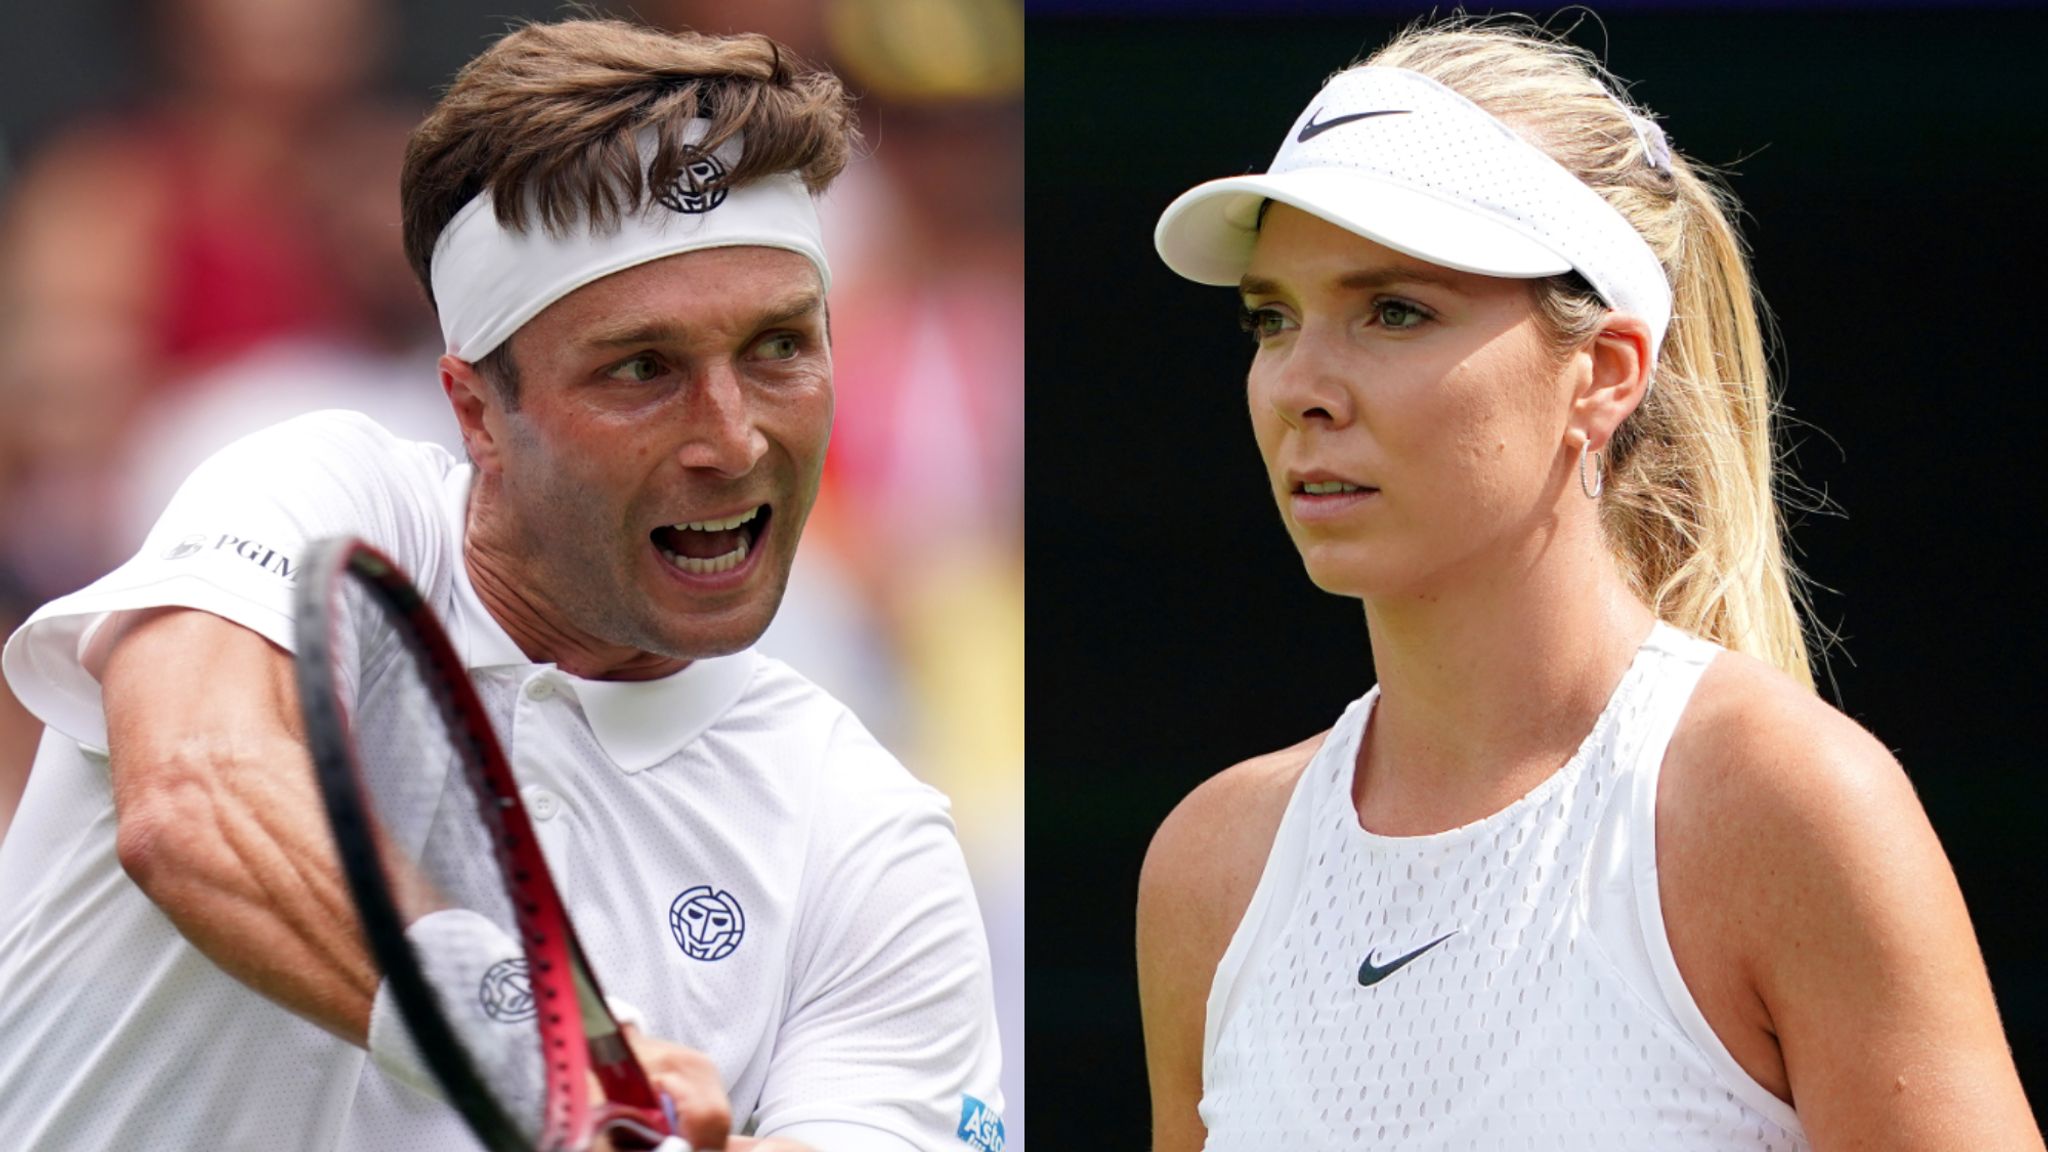 Wimbledon Liam Broady and Katie Boulter both make it through to third round Tennis News Sky Sports